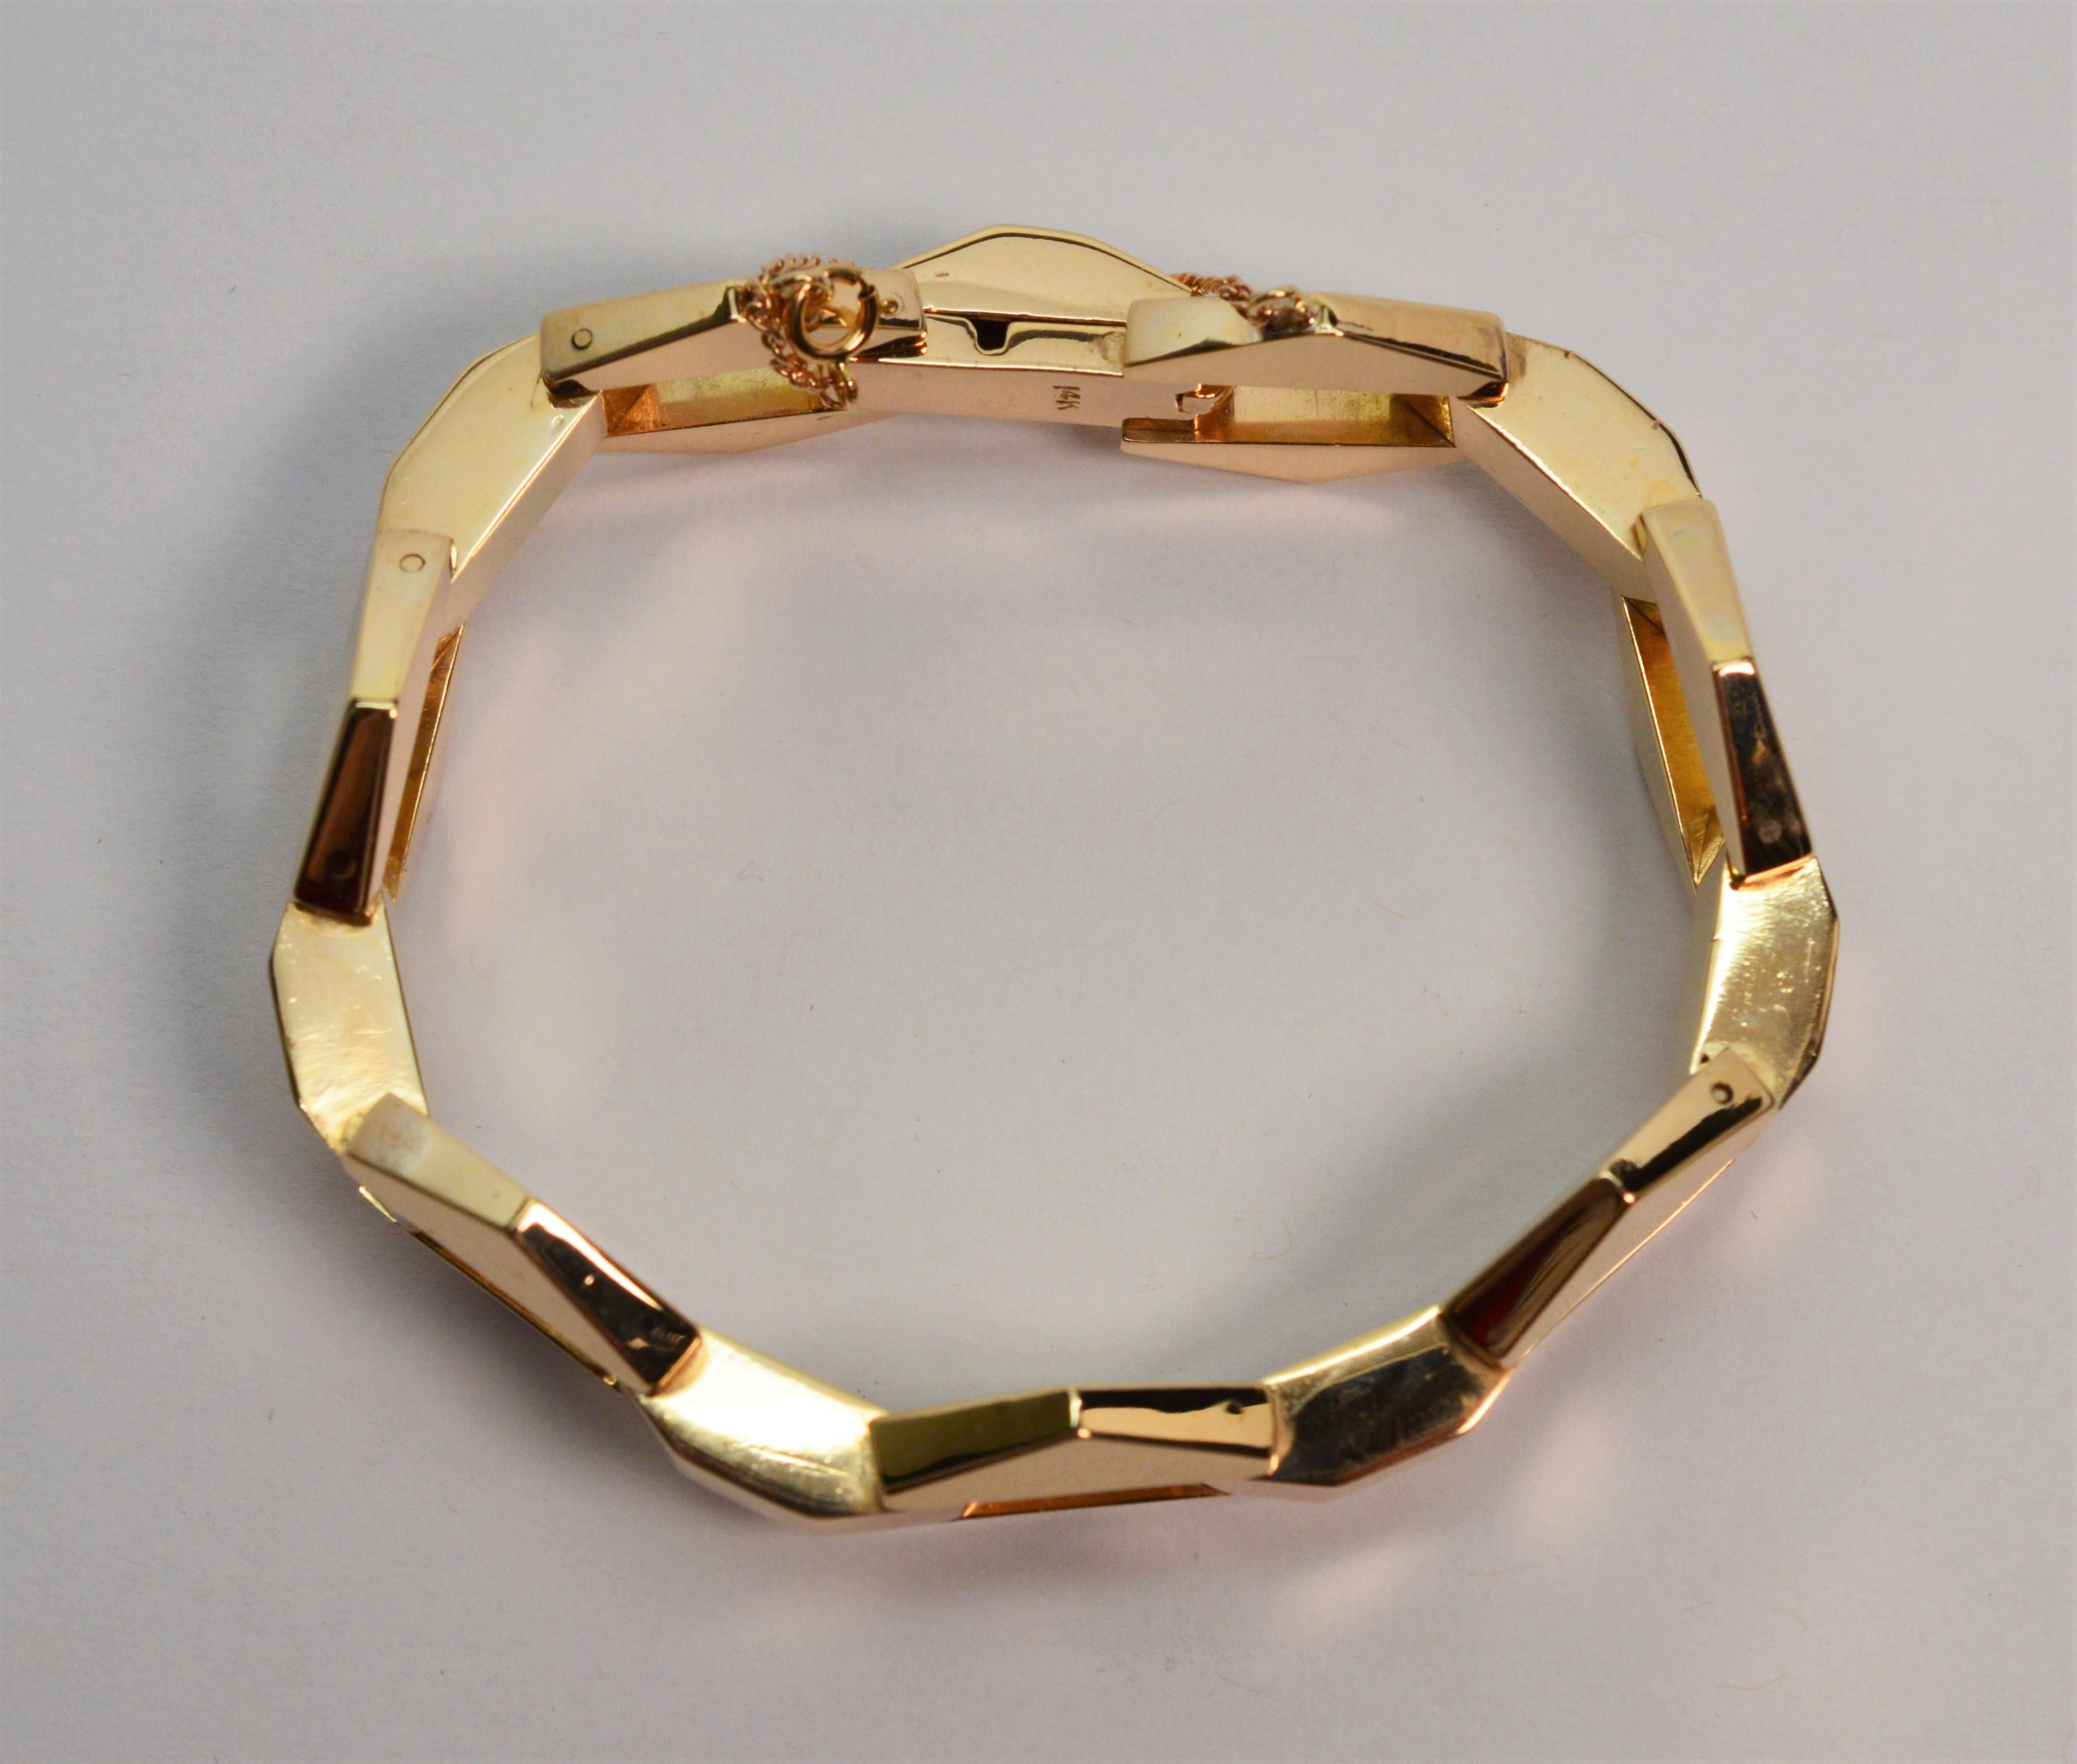 Retro Geometric Link Yellow Gold Bracelet In Good Condition For Sale In Mount Kisco, NY